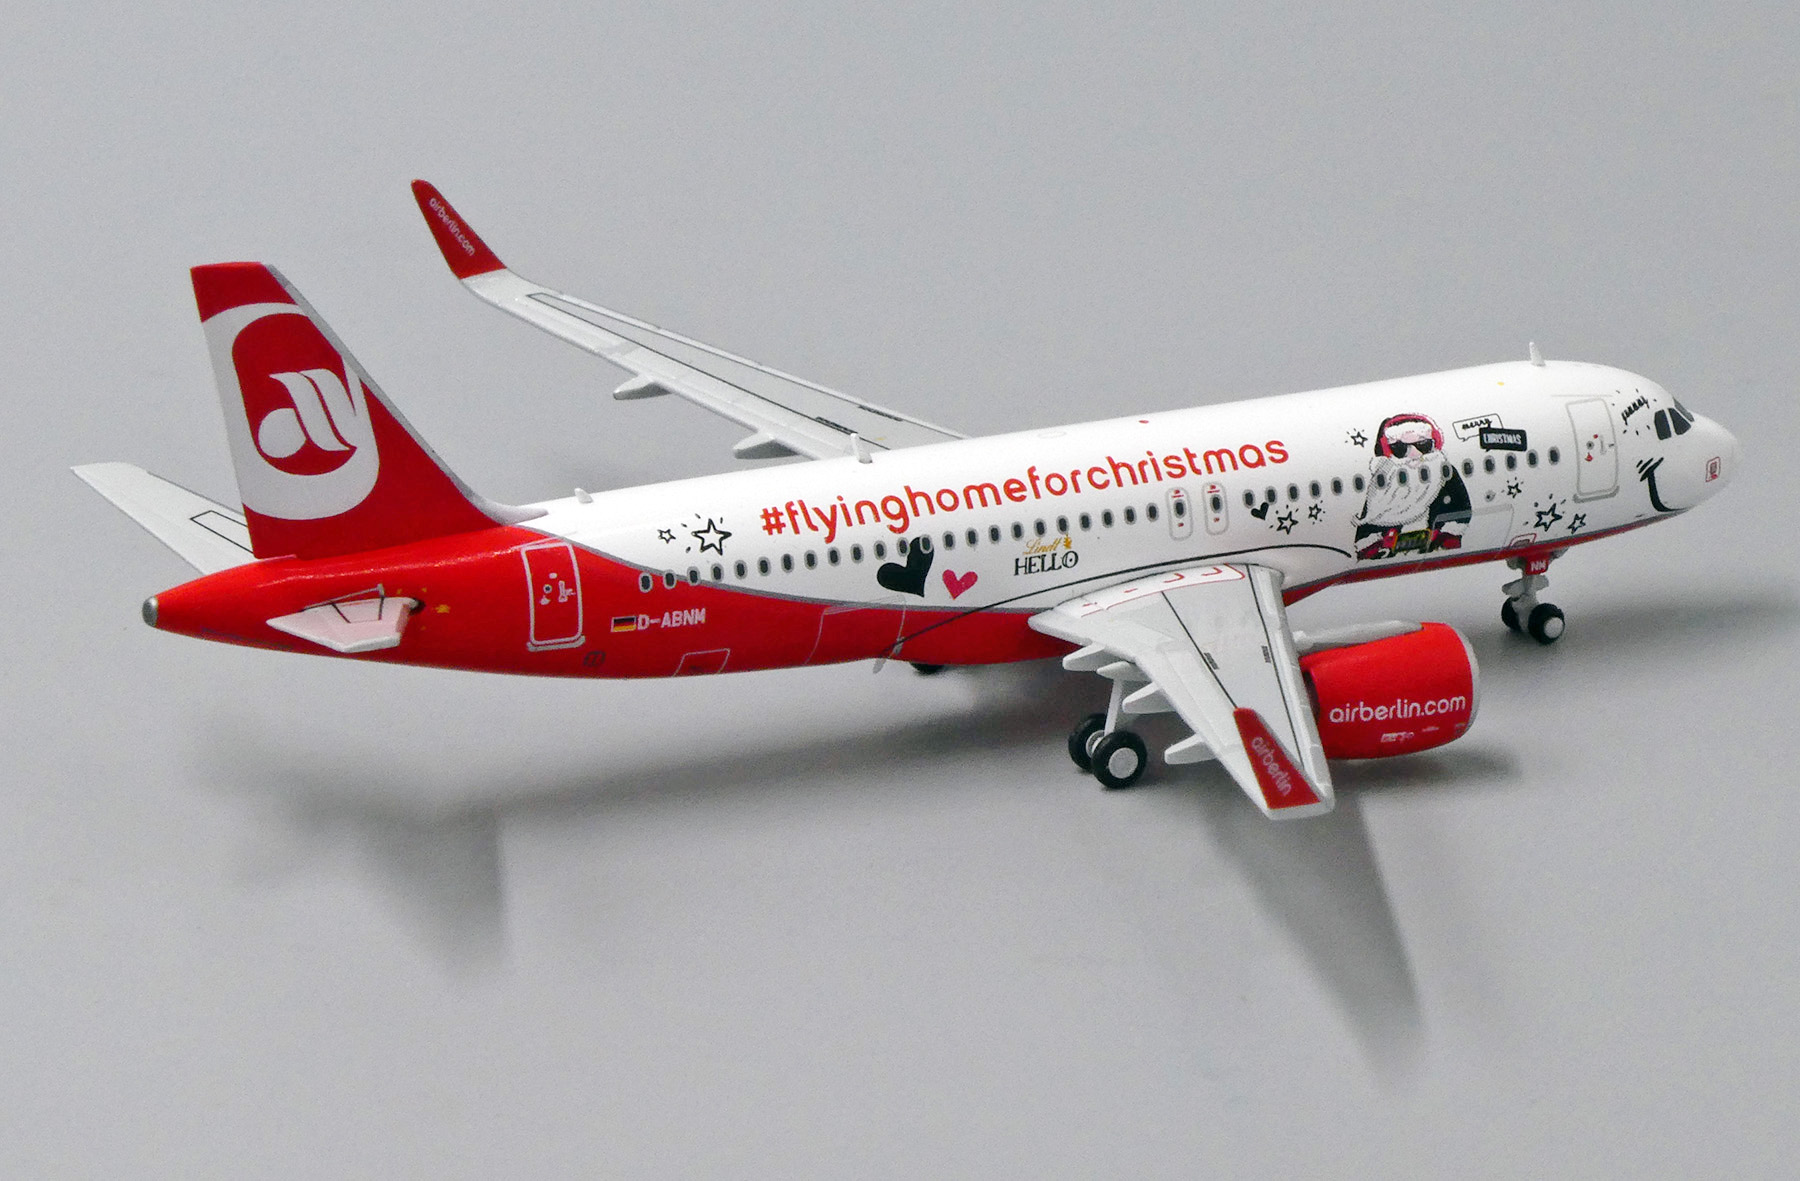 Details about   Air Berlin A320 Reg D-ABNM Scale 1:400 Diecast Model JC Wings LH4099 